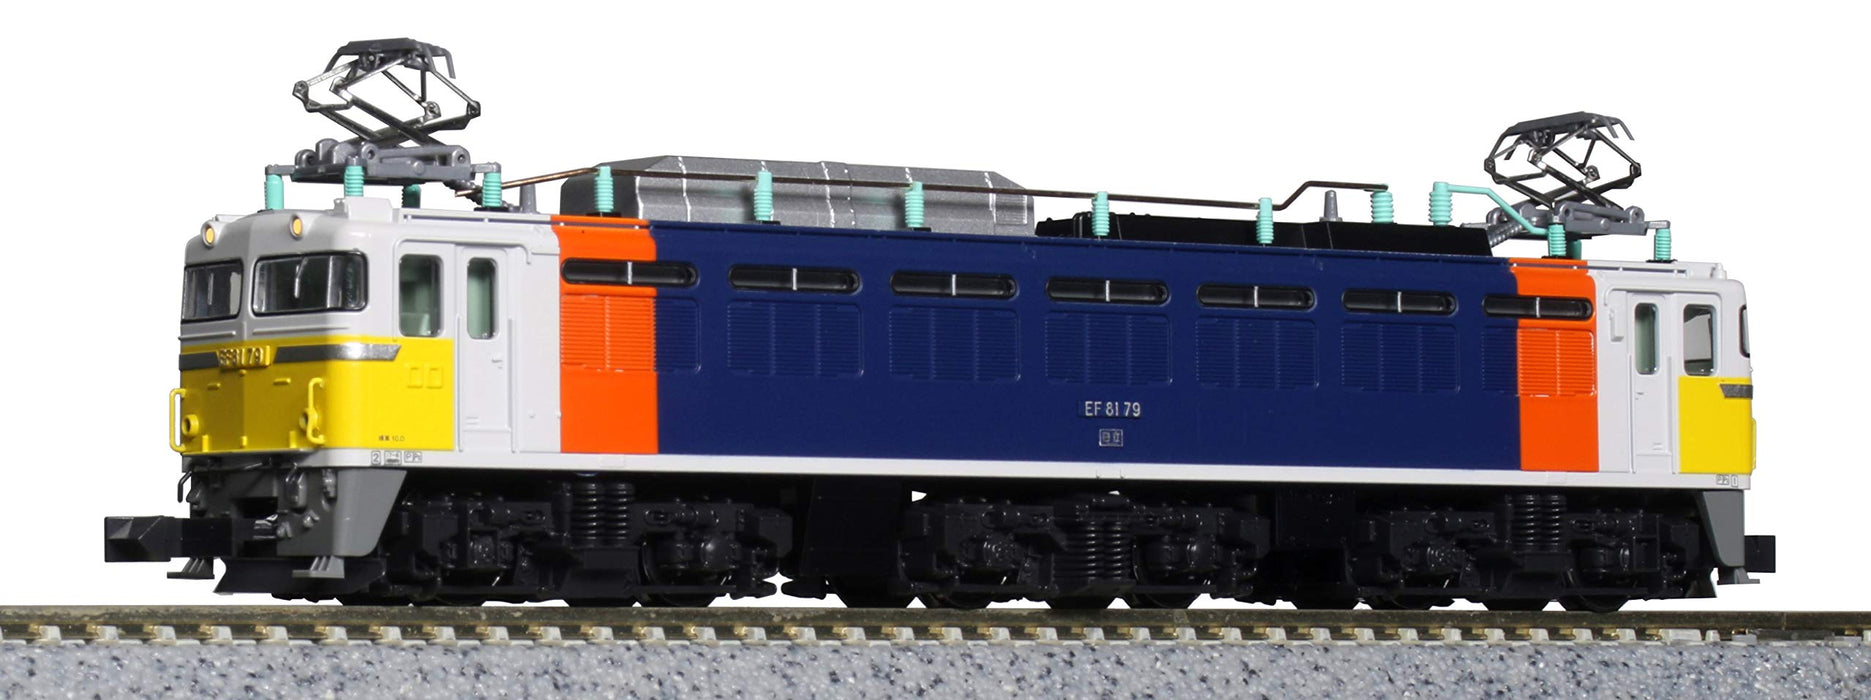 Kato N Gauge 3066-A Electric Locomotive Railway Model in Cassiopeia Color